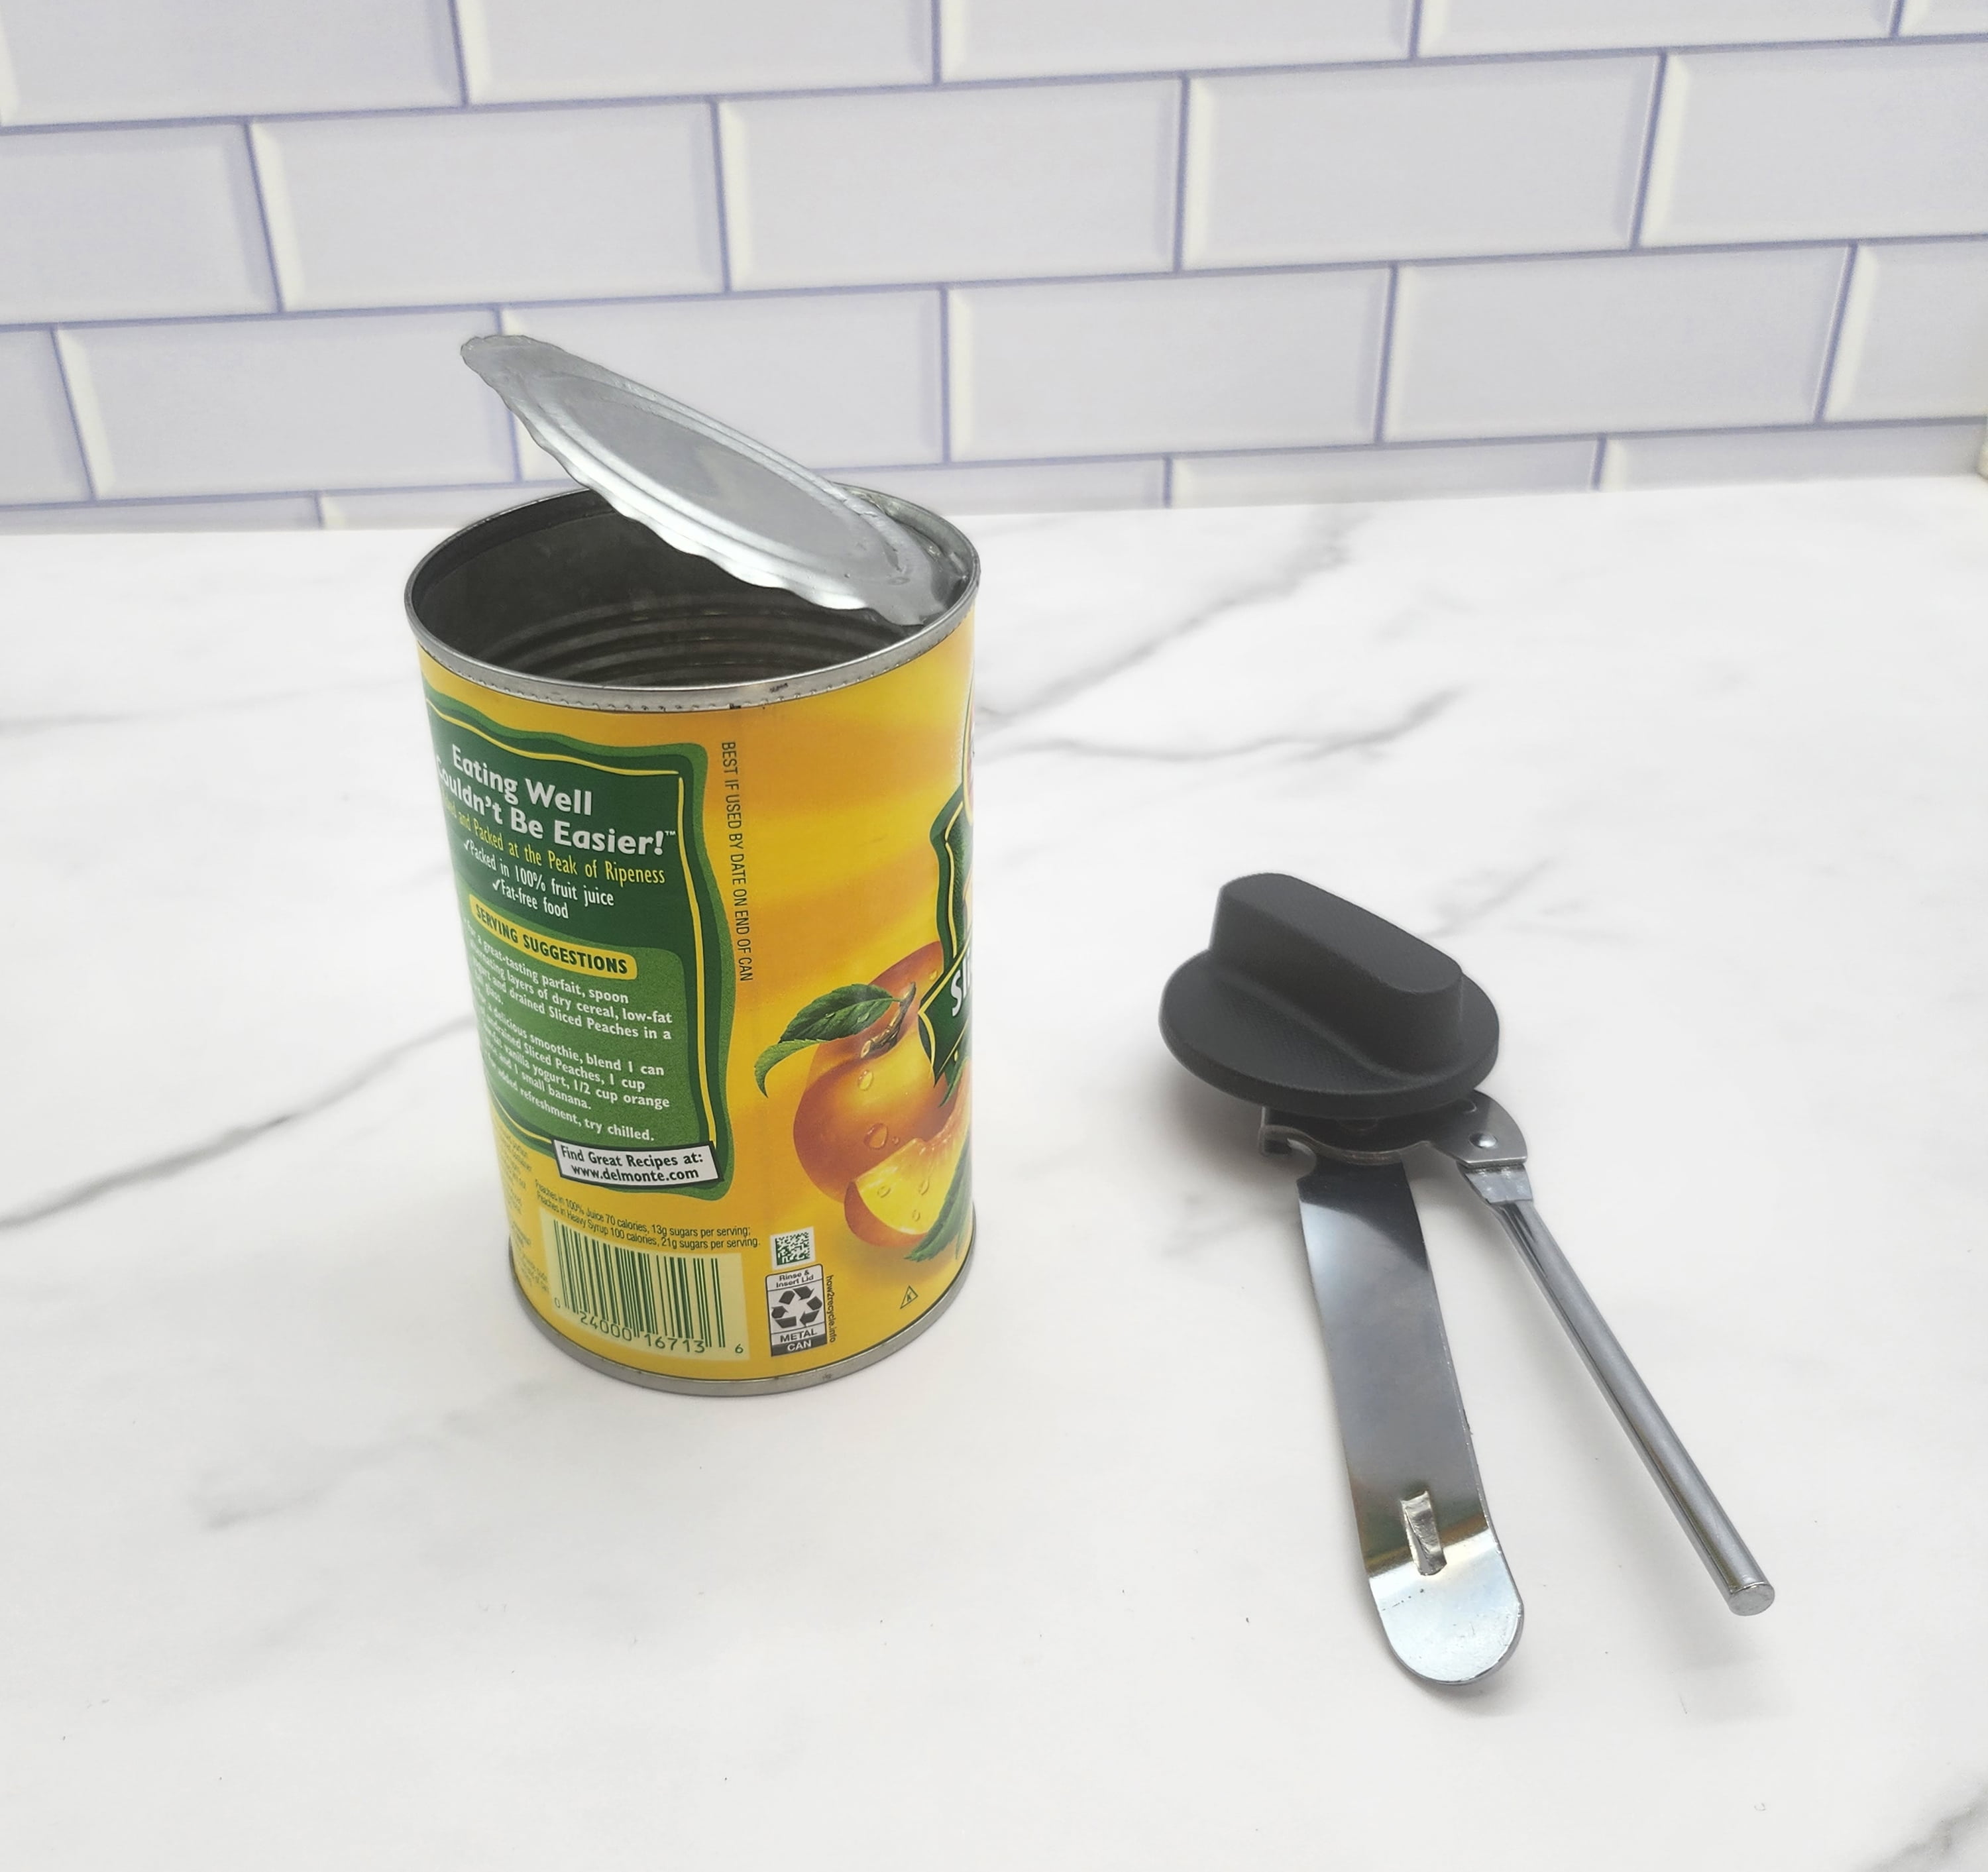 The Correct Way To Use A Can Opener